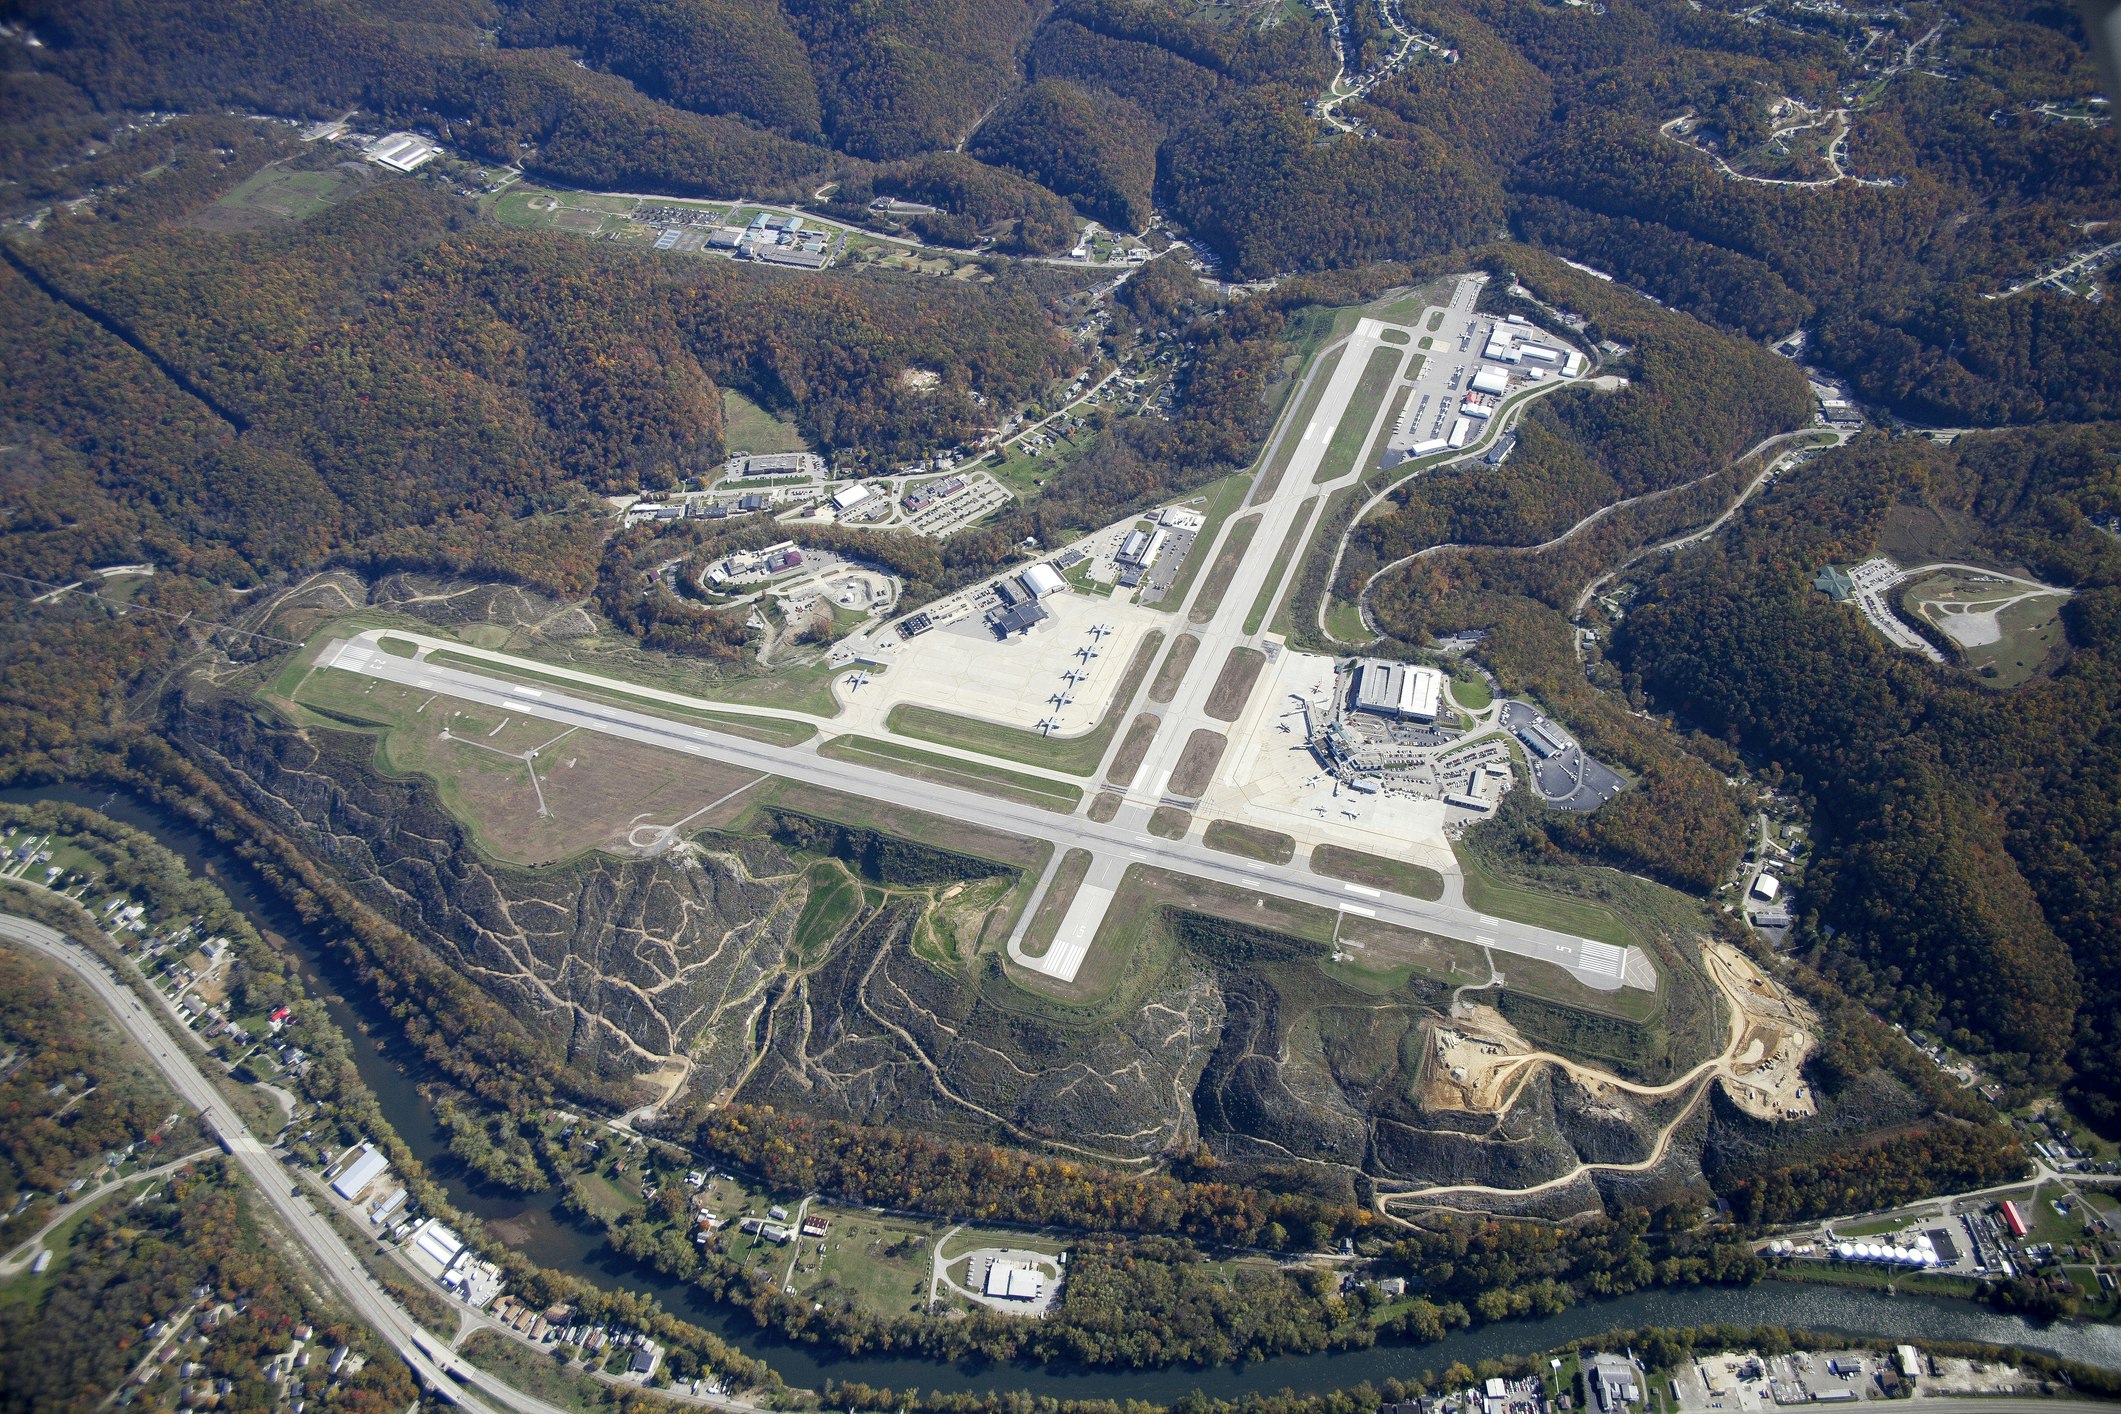 An aerial view of the airfield and airport in Charleston, West Virginia surrounded by gentle rolling hills just barely starting to show the first colors of autumn